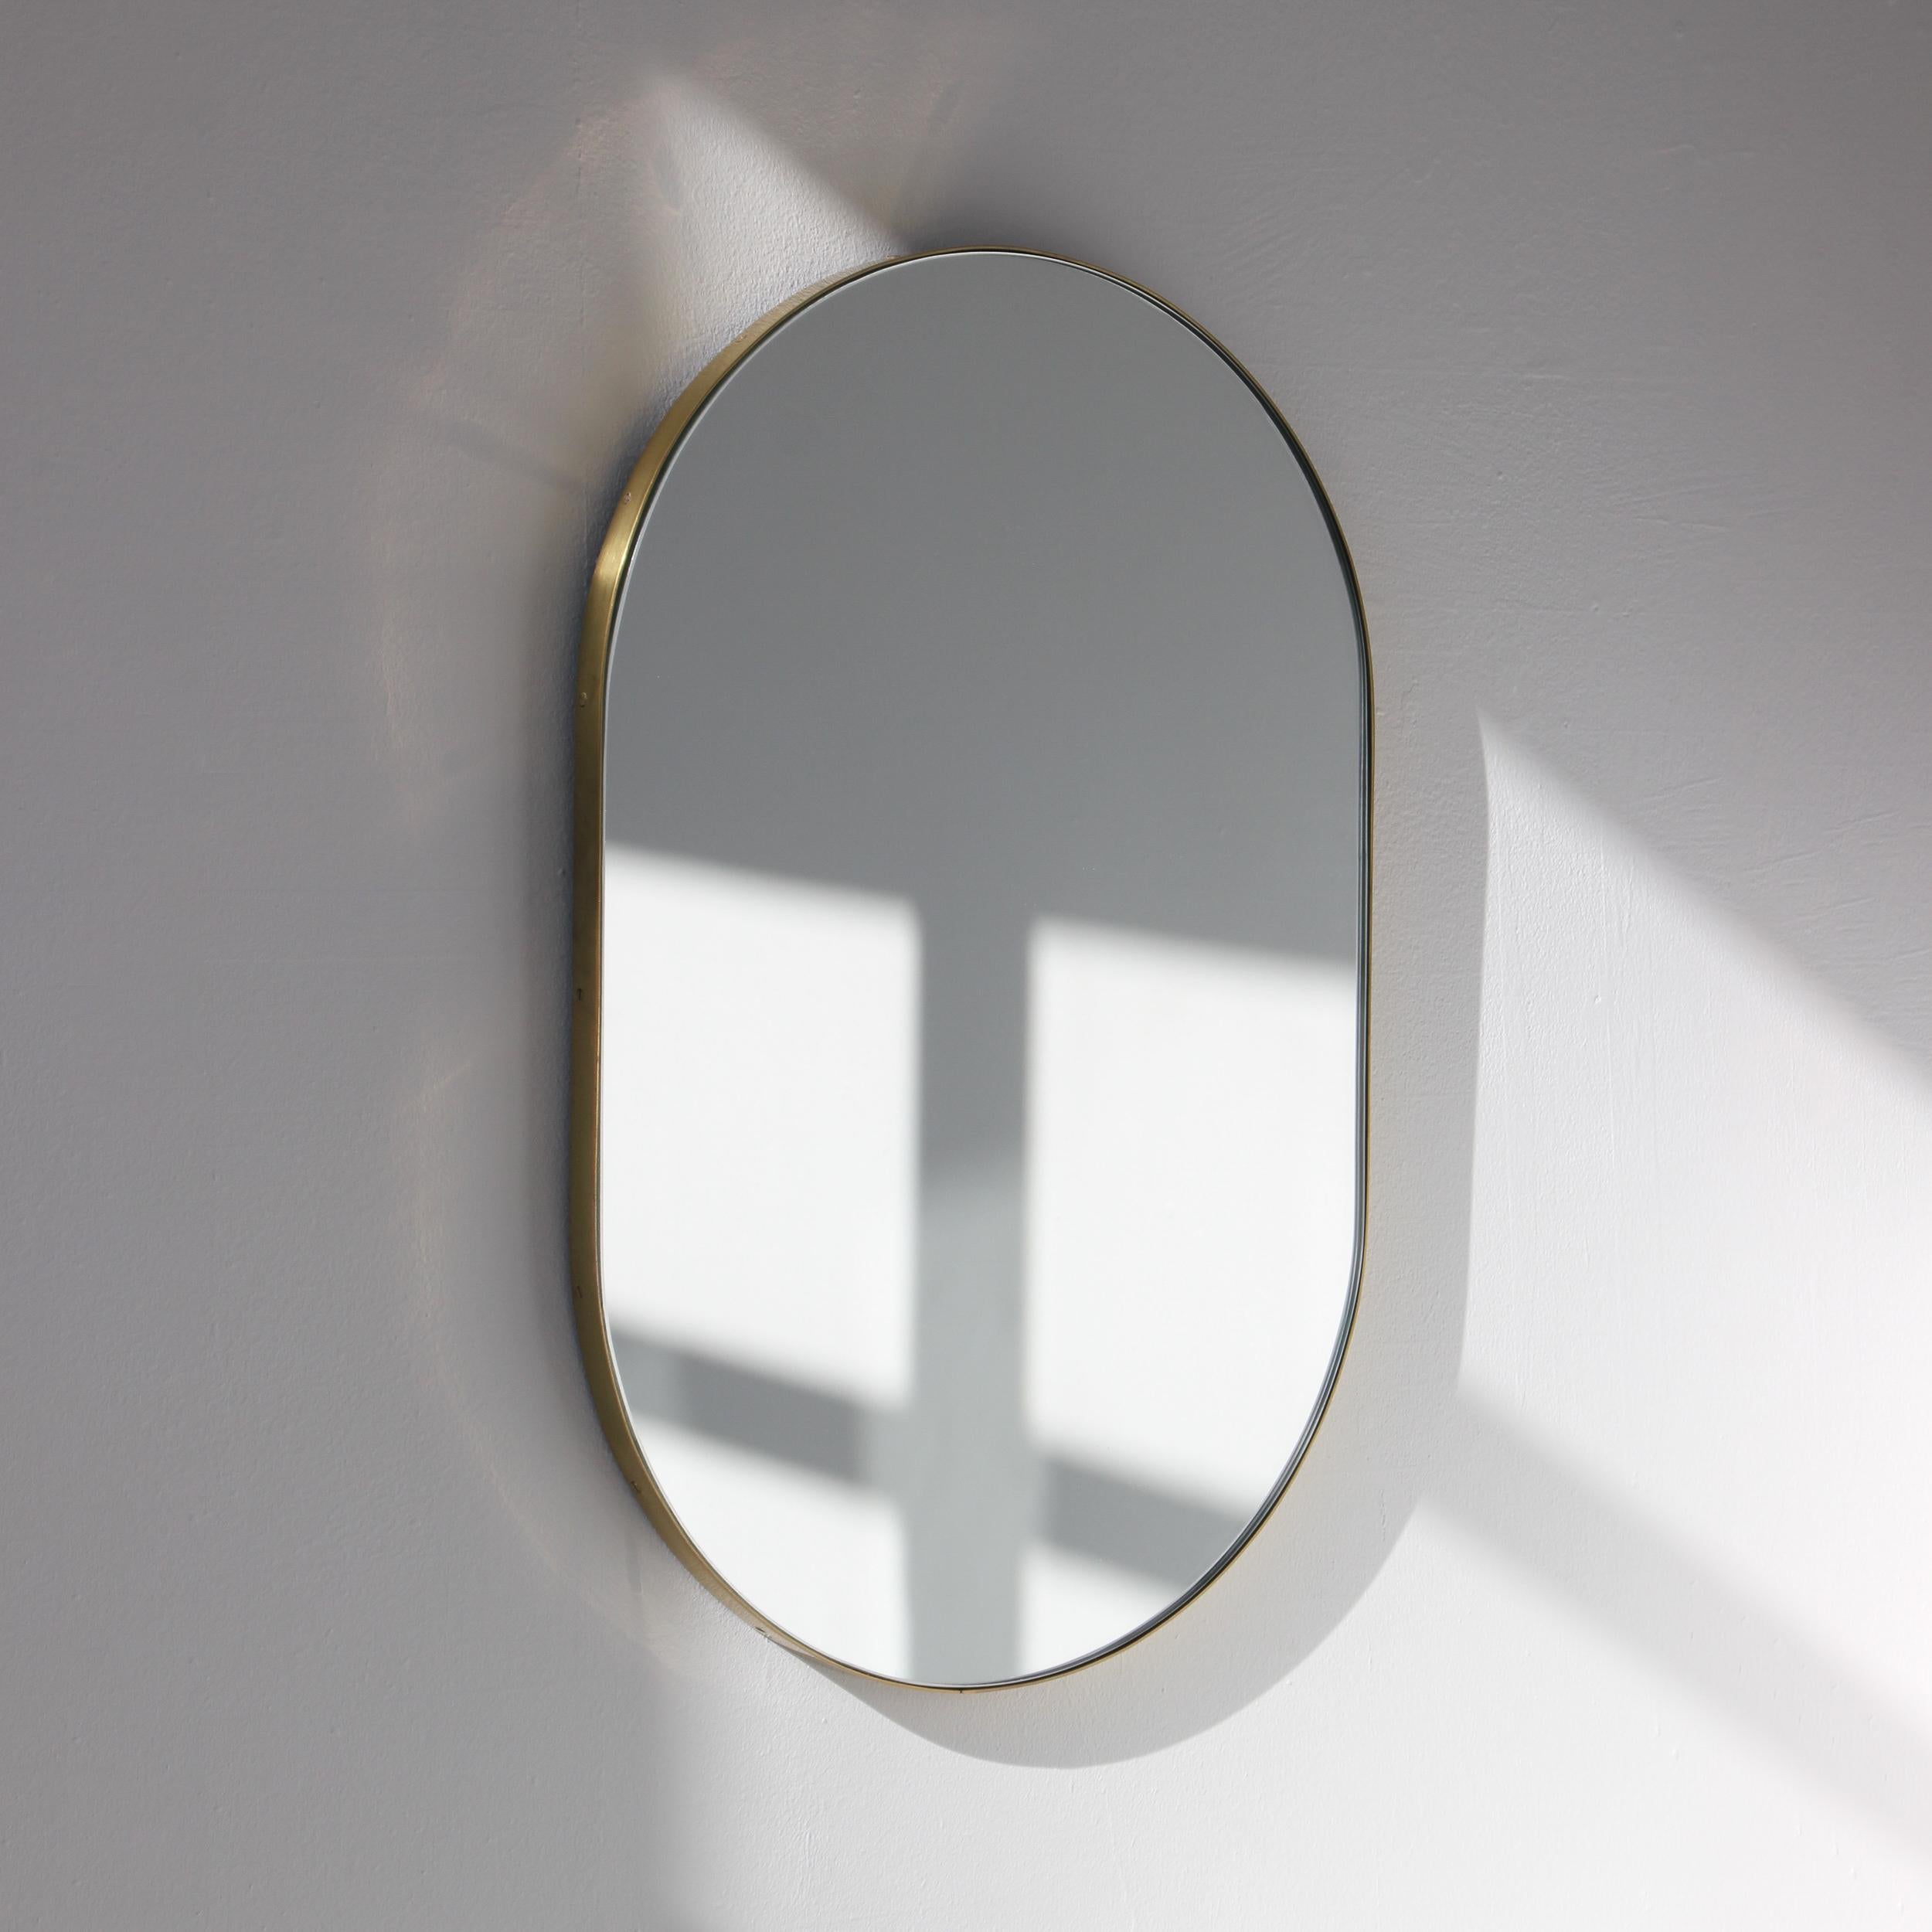 Delightful handcrafted capsule shaped mirror with a solid brushed brass frame and a demister pad. Designed and handcrafted in London, UK.

Fitted with a brass hook or an aluminium z-bar depending on the size of the mirror. Also available on demand